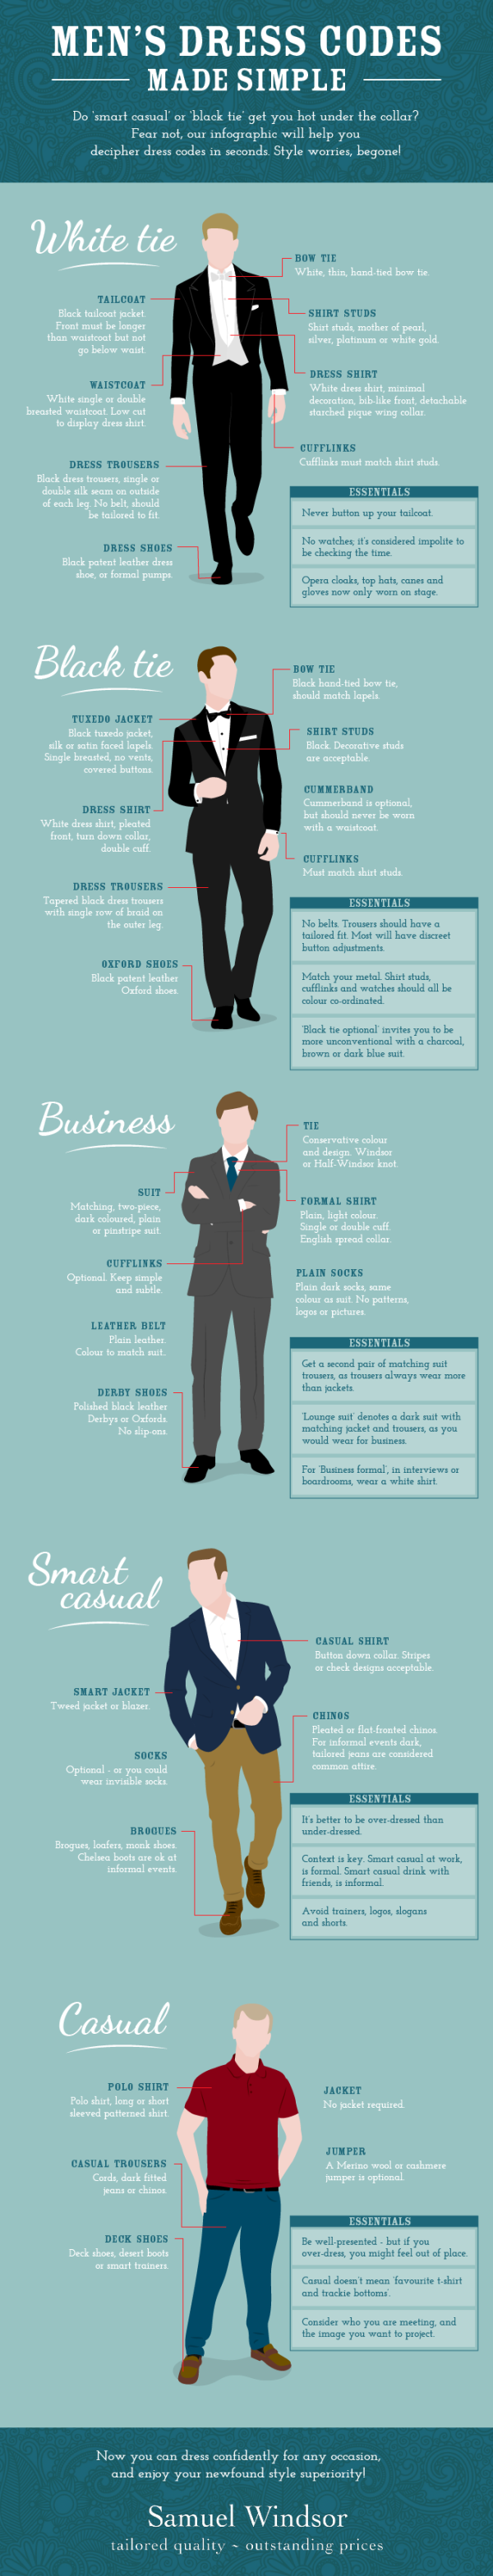 Men's Dress Codes Made Simple infographic